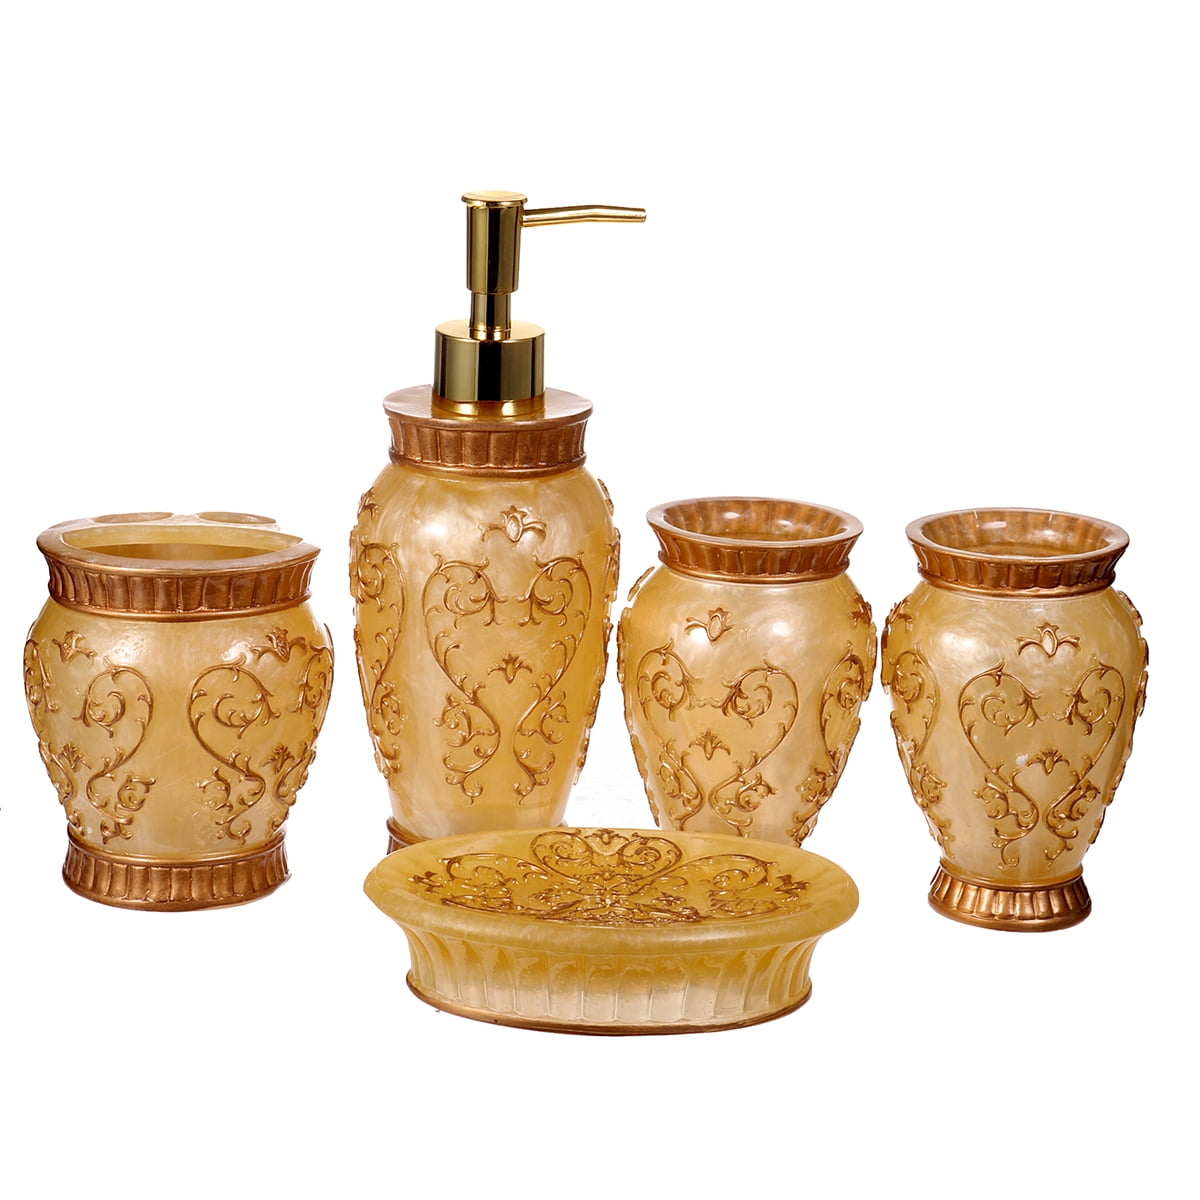 Resin Bathroom Accessories Set Rome Aristocracy Toothbrush Cup Soap Dish 5PCS 